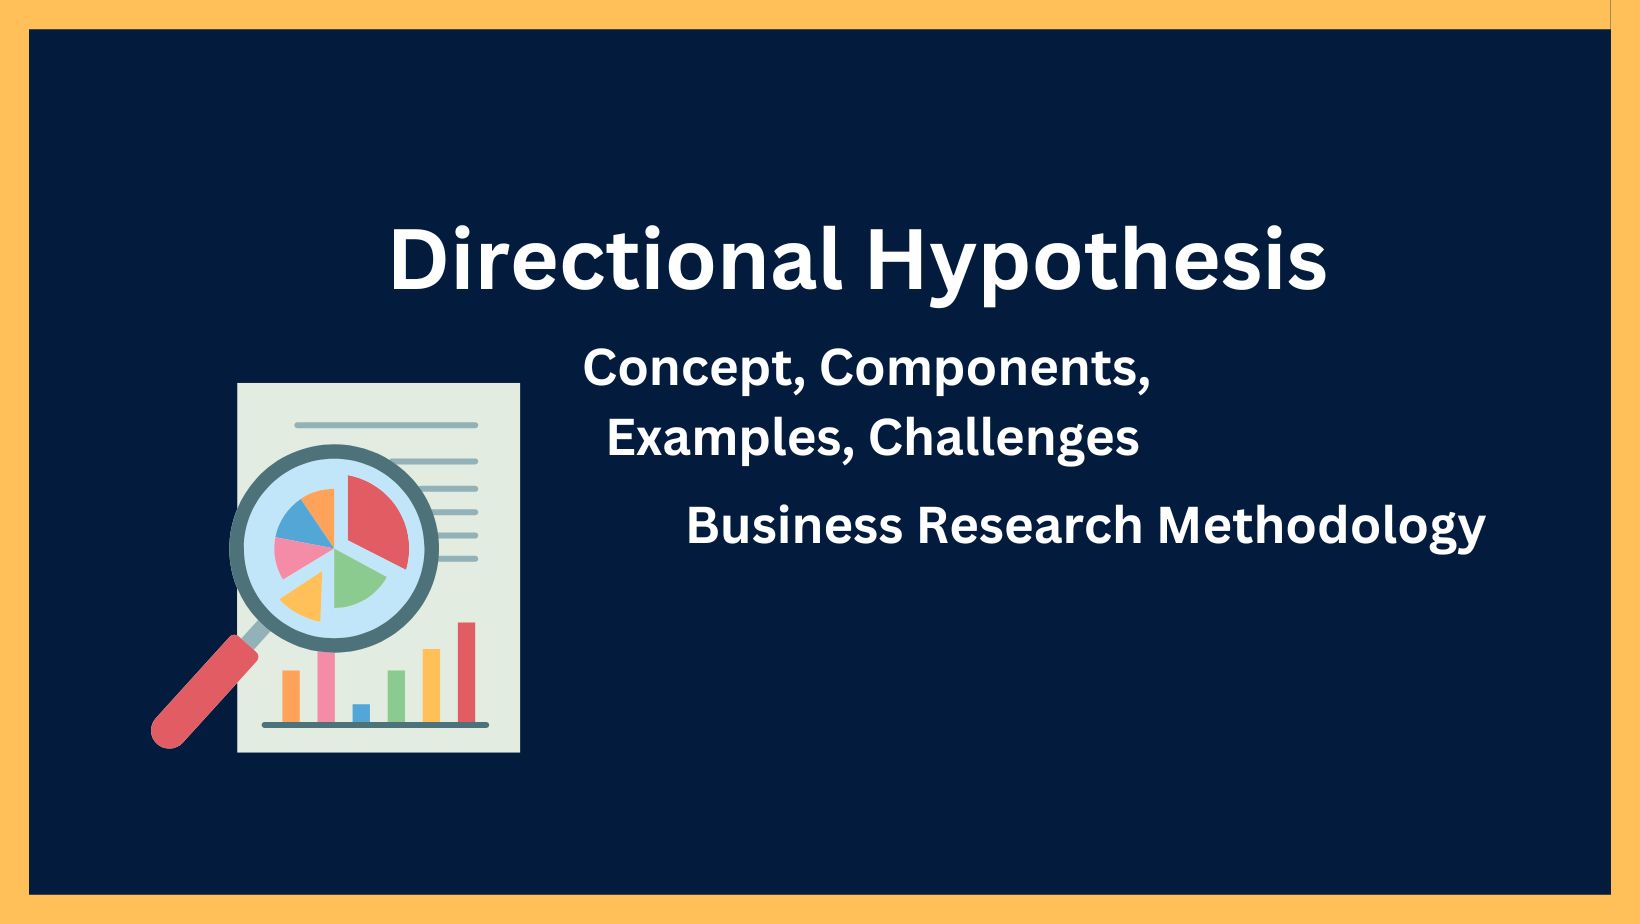 directional hypothesis definition